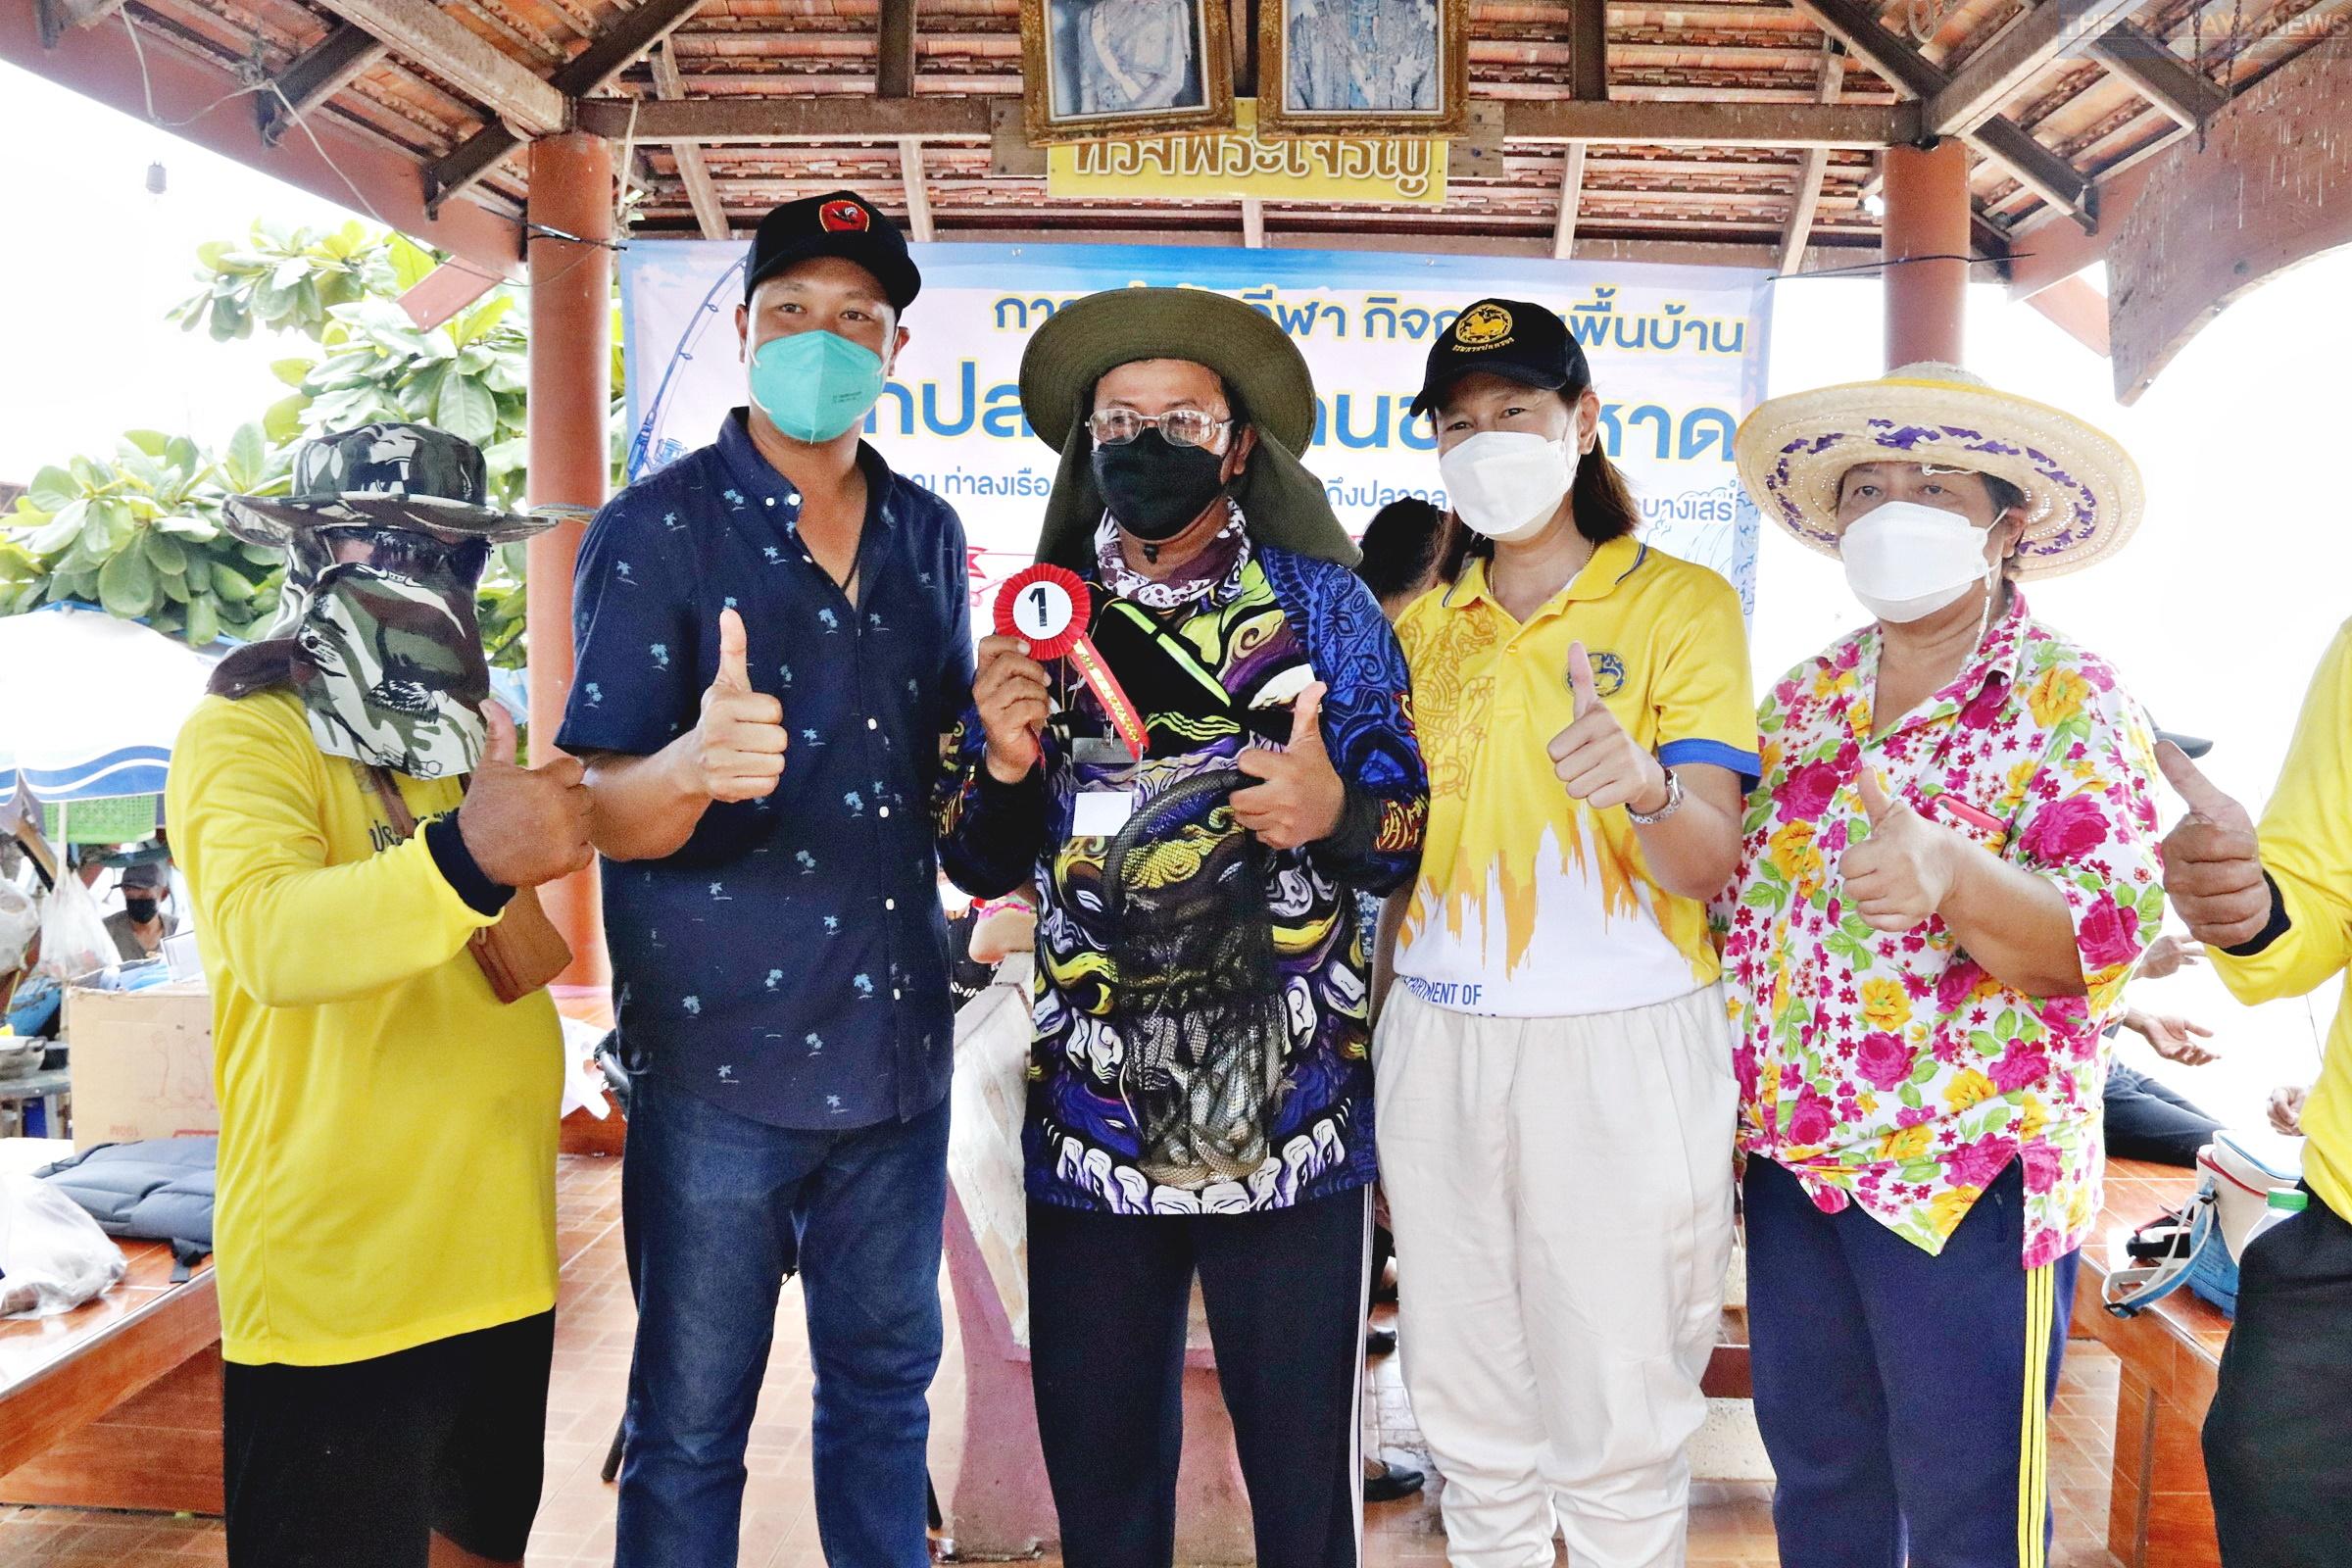 Analysis: Thai Public Health Ministry doubling down on public mask mandates, say looking for ways to enforce them better for tourists